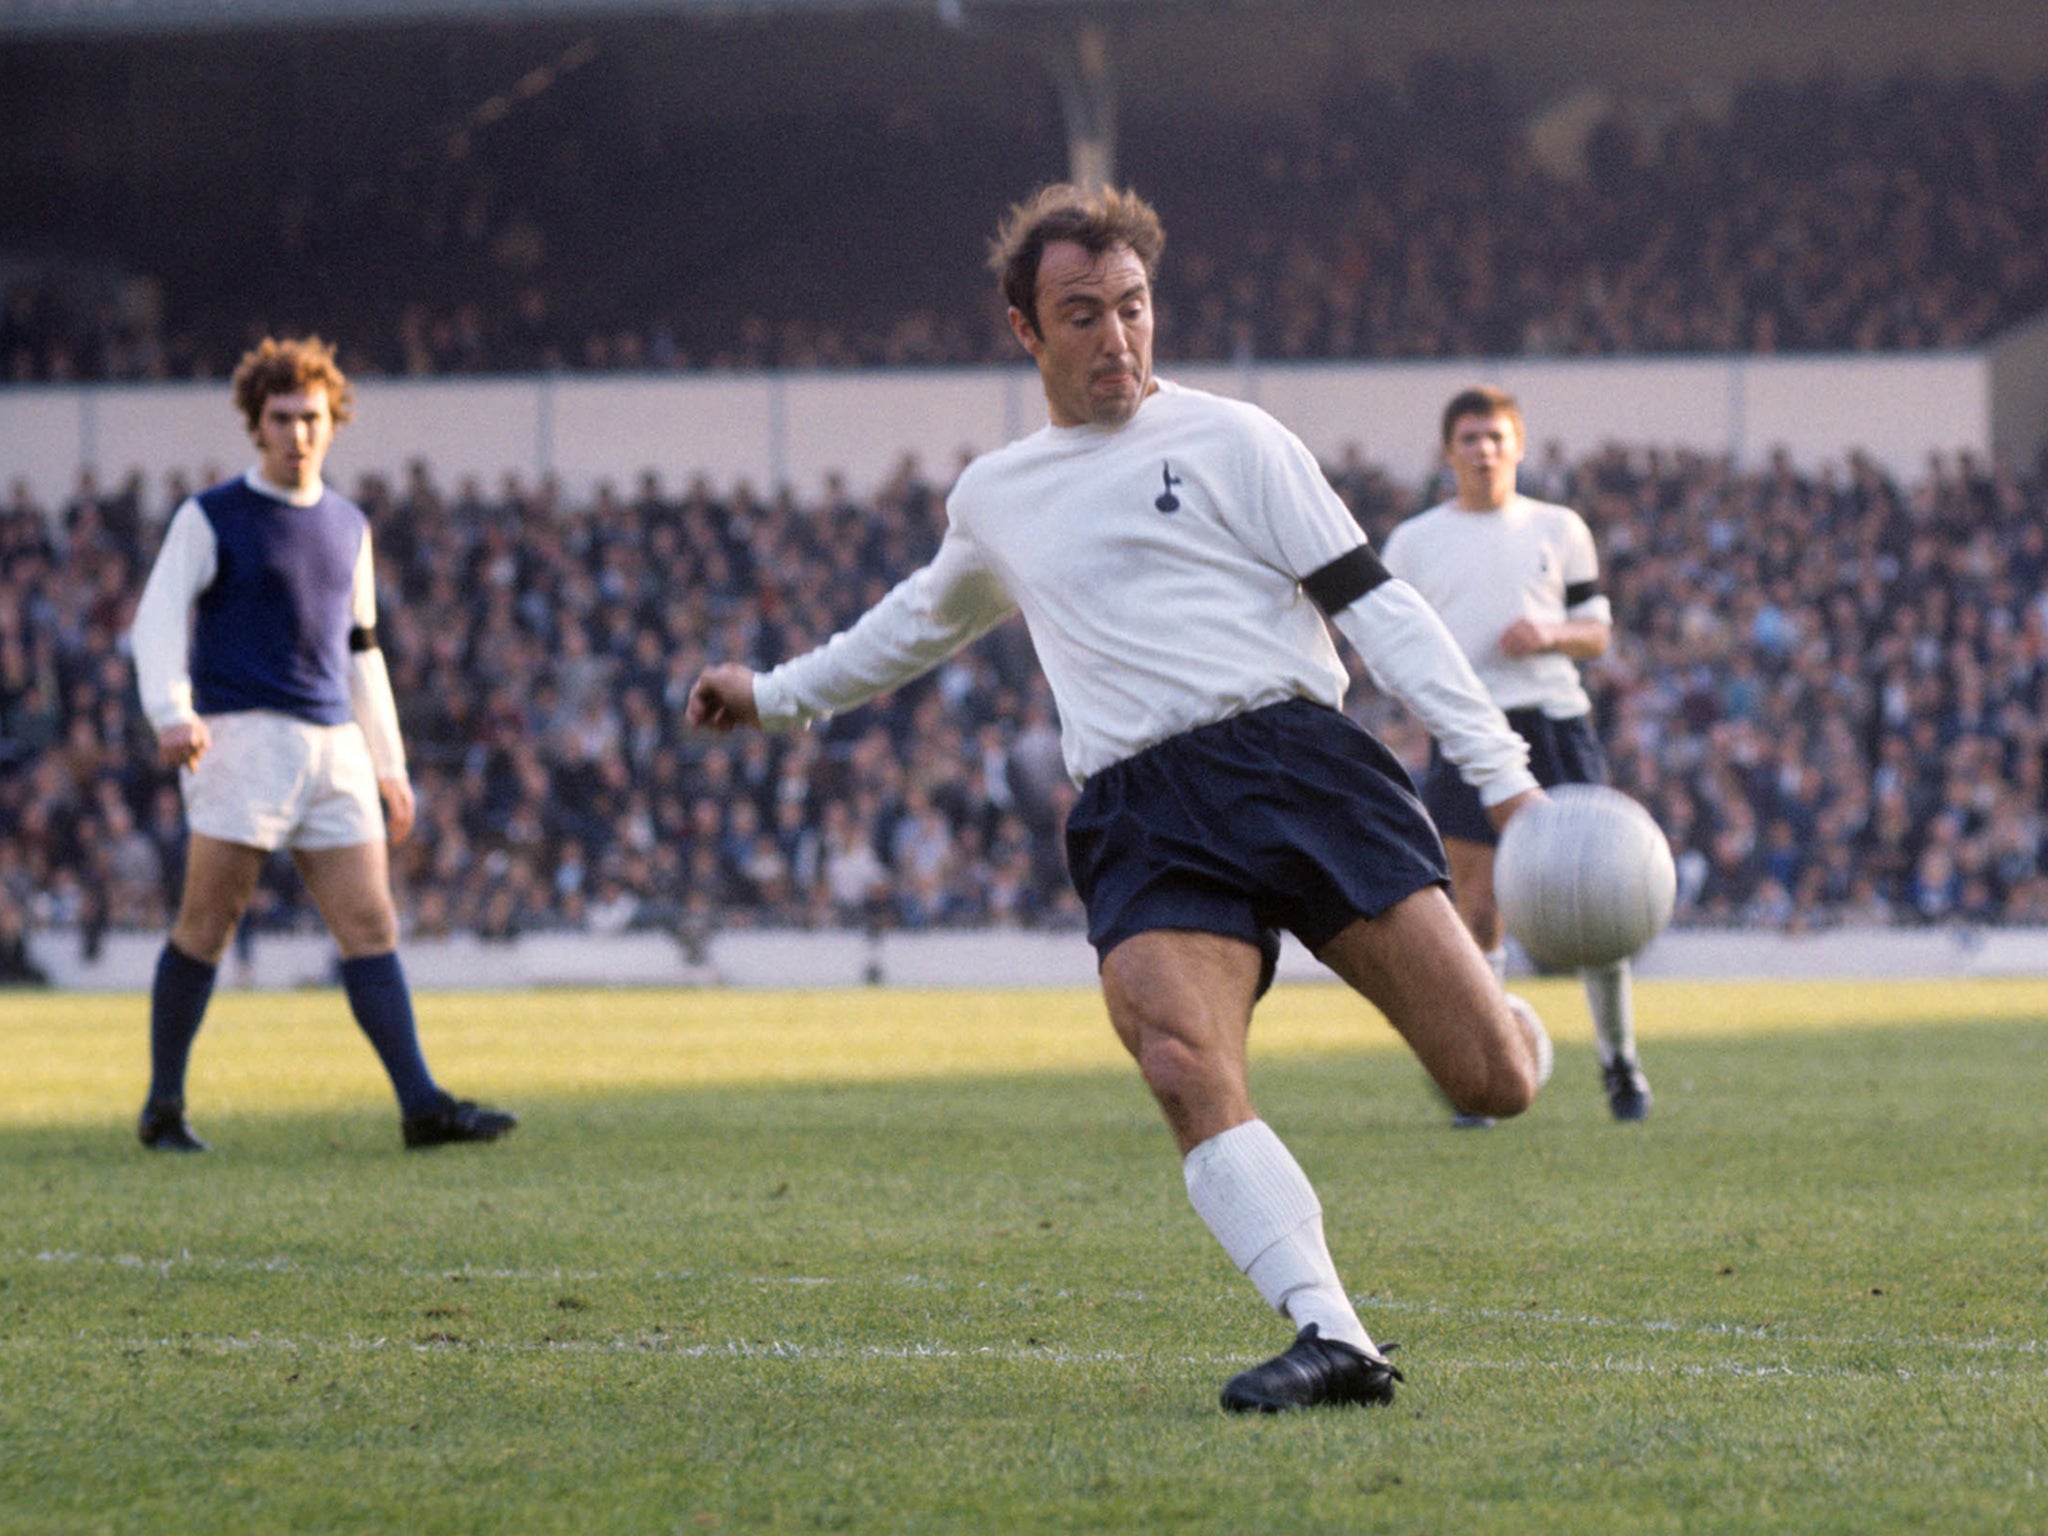 Tributes were paid to Jimmy Greaves after Tottenham confirmed the goalscoring great had died on Sunday morning